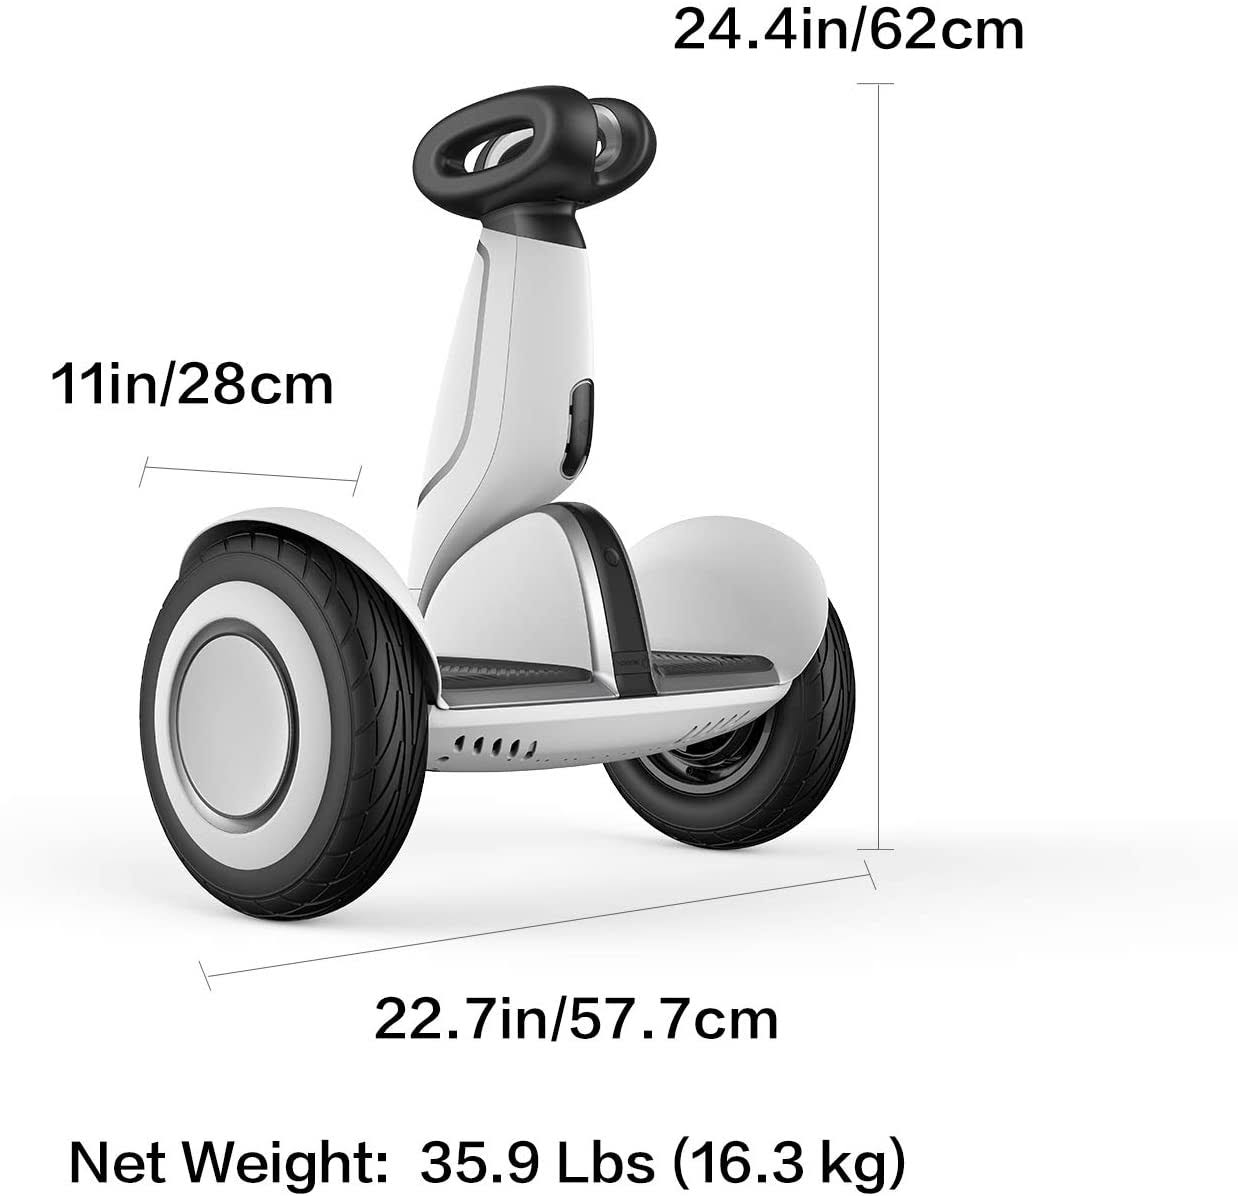 Ninebot S-Plus Smart Self-Balancing Electric Scooter with Intelligent Lighting and Battery System, Remote Control and Auto-Following Mode, White